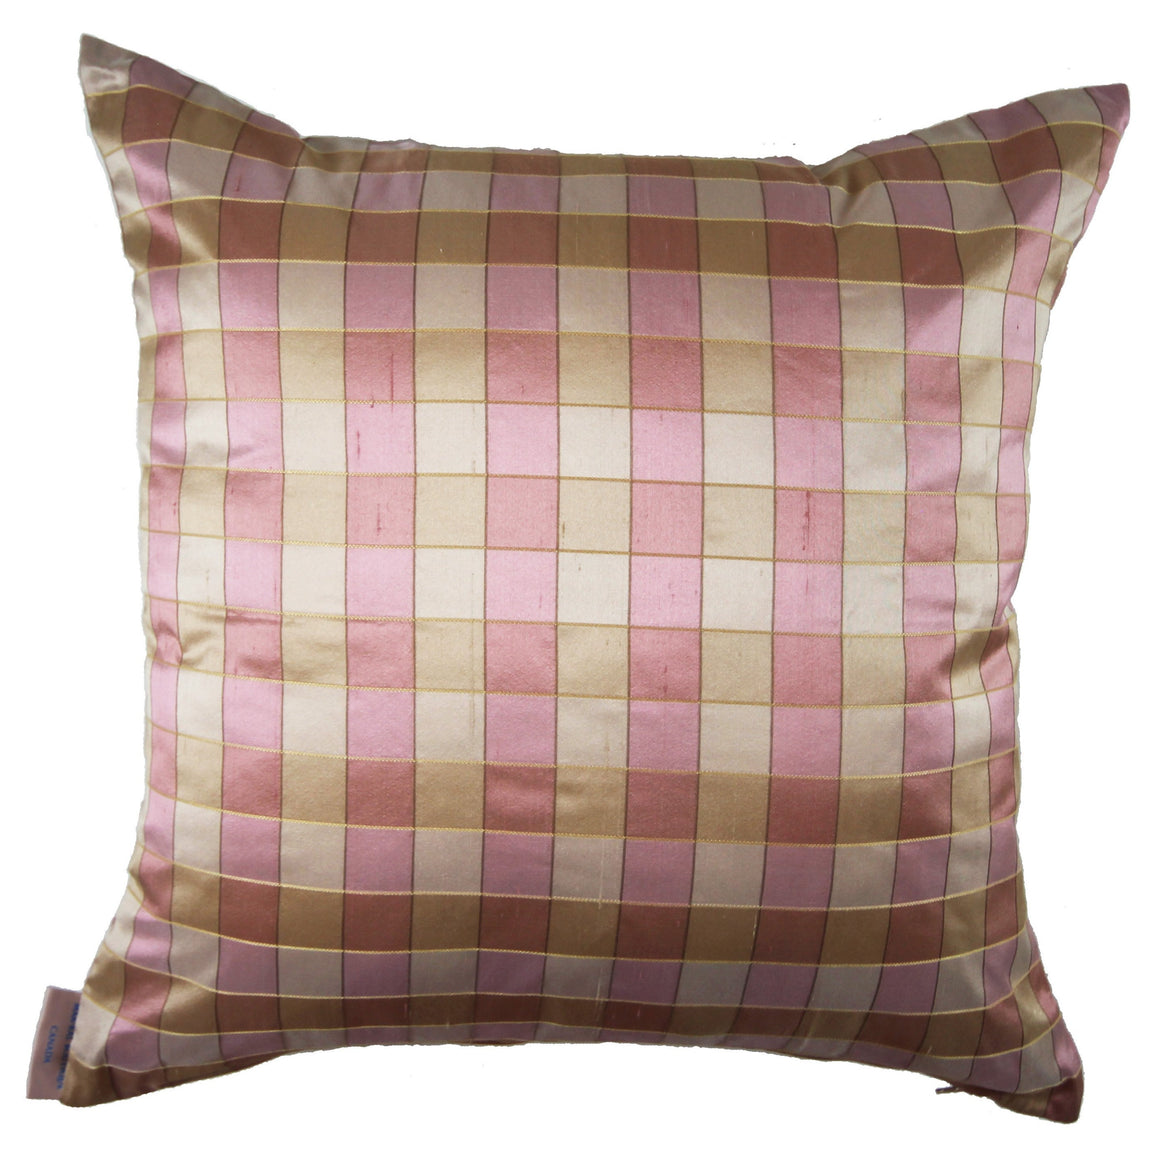 Beatrice - Fall Orange and Yellow Plaid Pillow Cover - 22x22